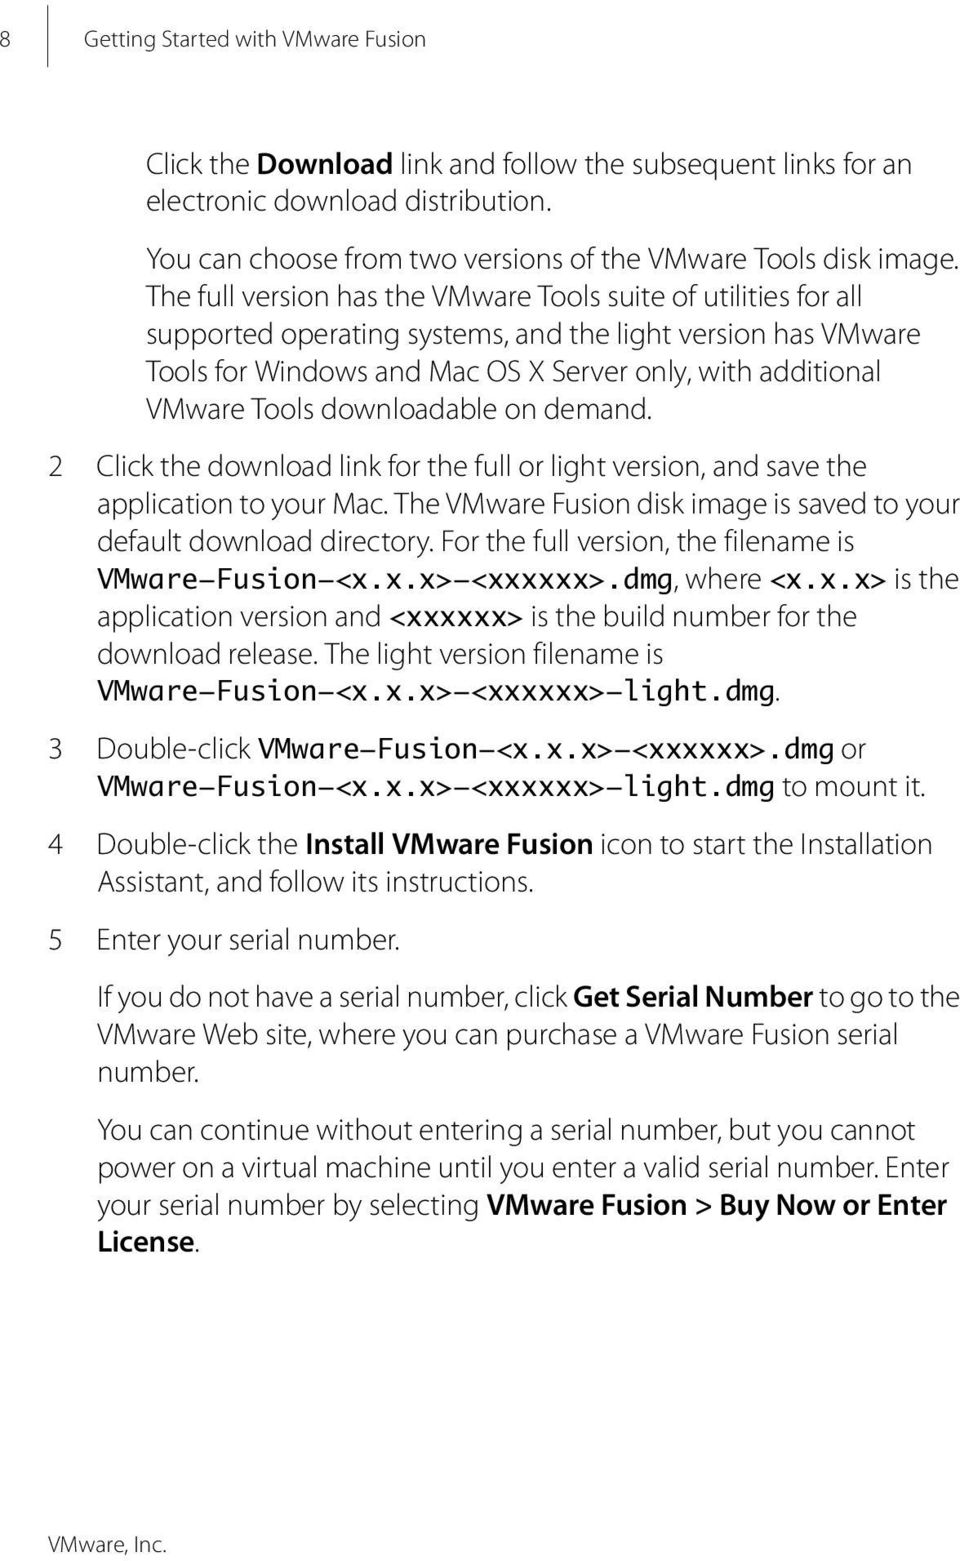 downloadable on demand. 2 Click the download link for the full or light version, and save the application to your Mac. The VMware Fusion disk image is saved to your default download directory.